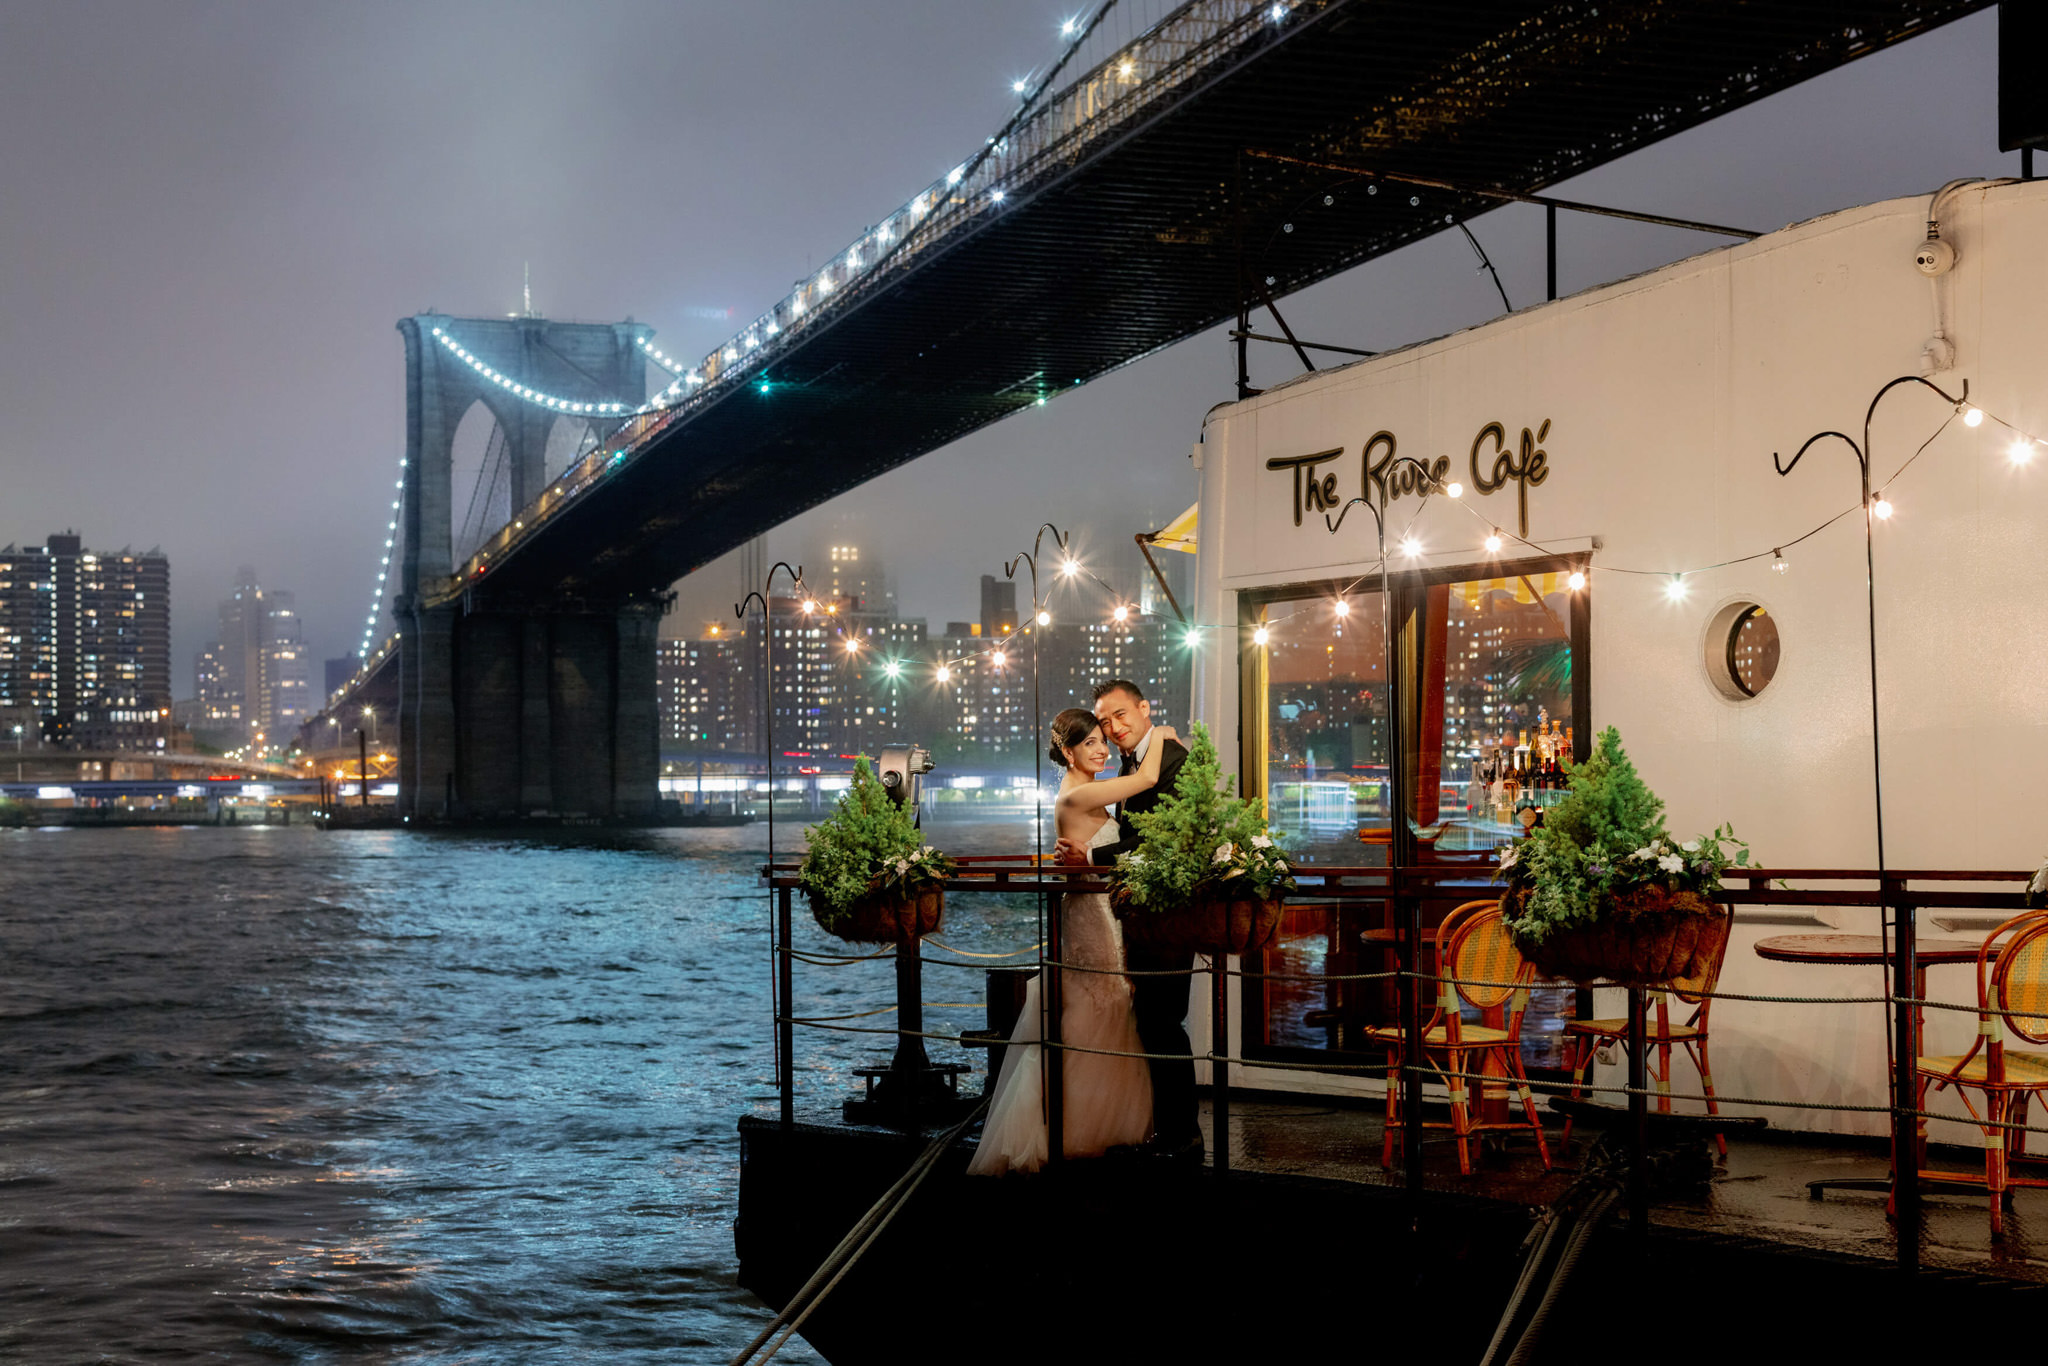 The newly-wed couple is standing in front of The River Cafe, with river and the Brooklyn Bridge in the background. Editorial wedding image by Jenny Fu Studio.